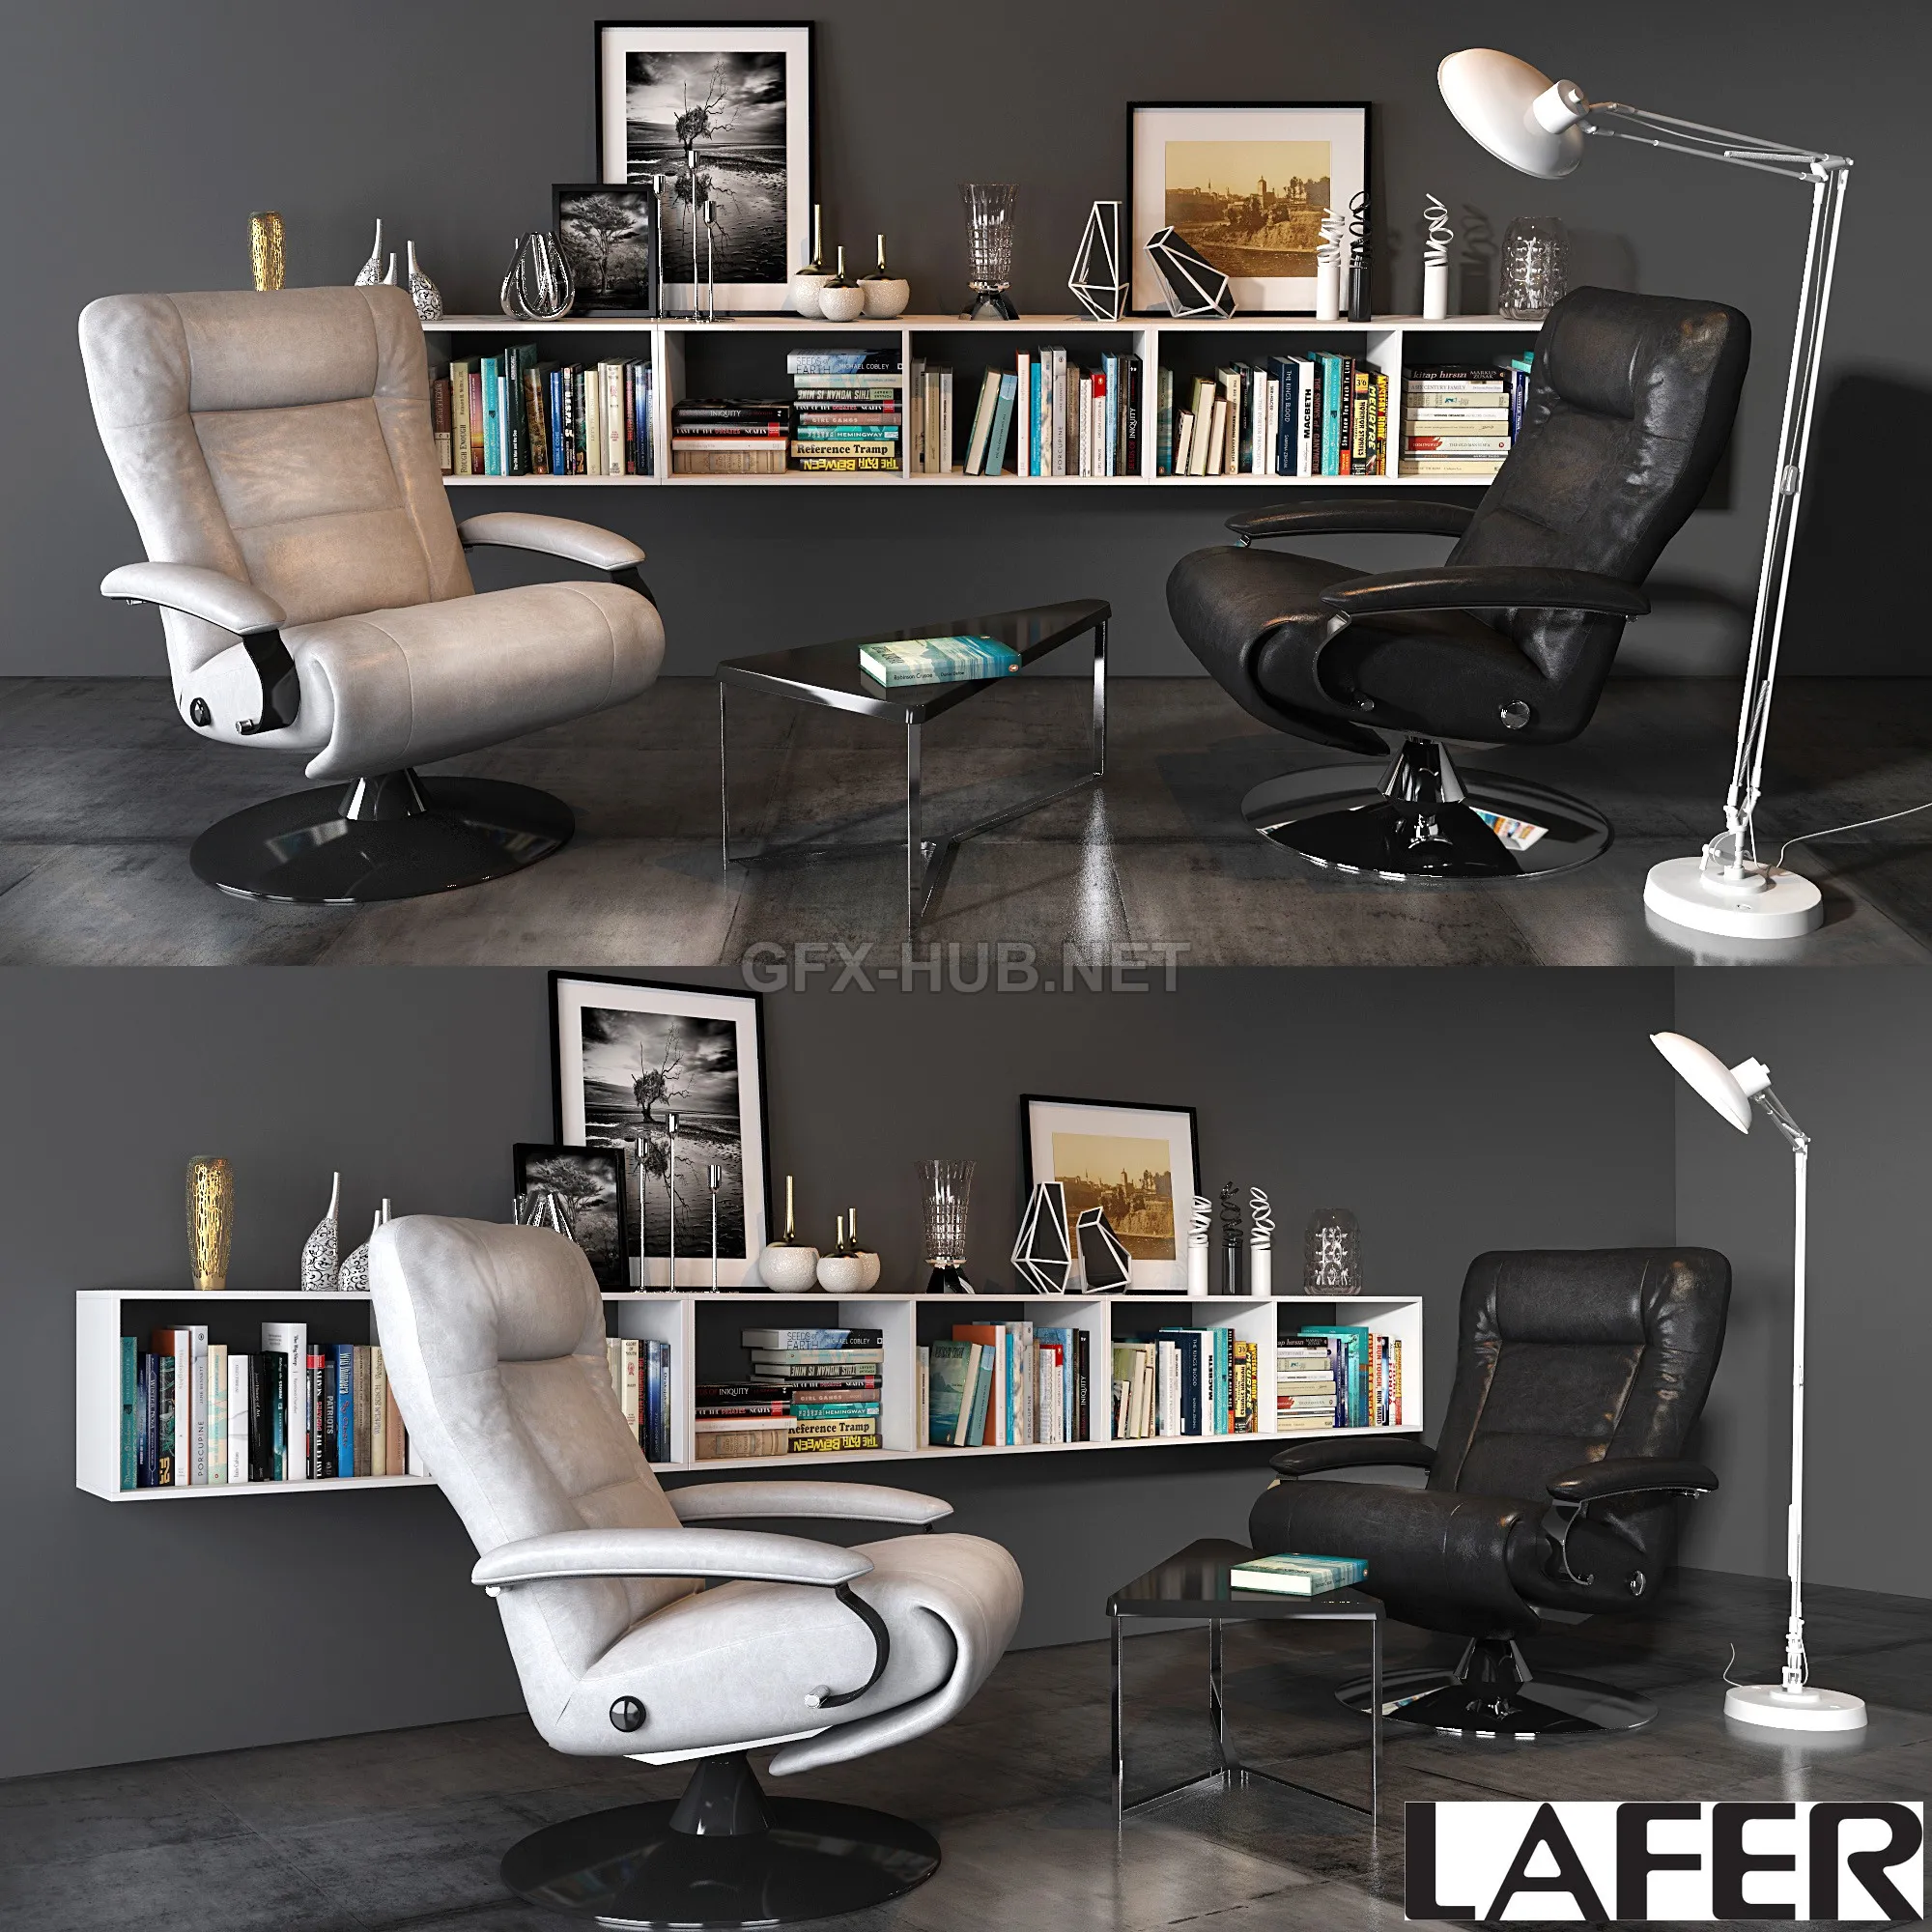 FURNITURE 3D MODELS – Lafer thor reclining chair set